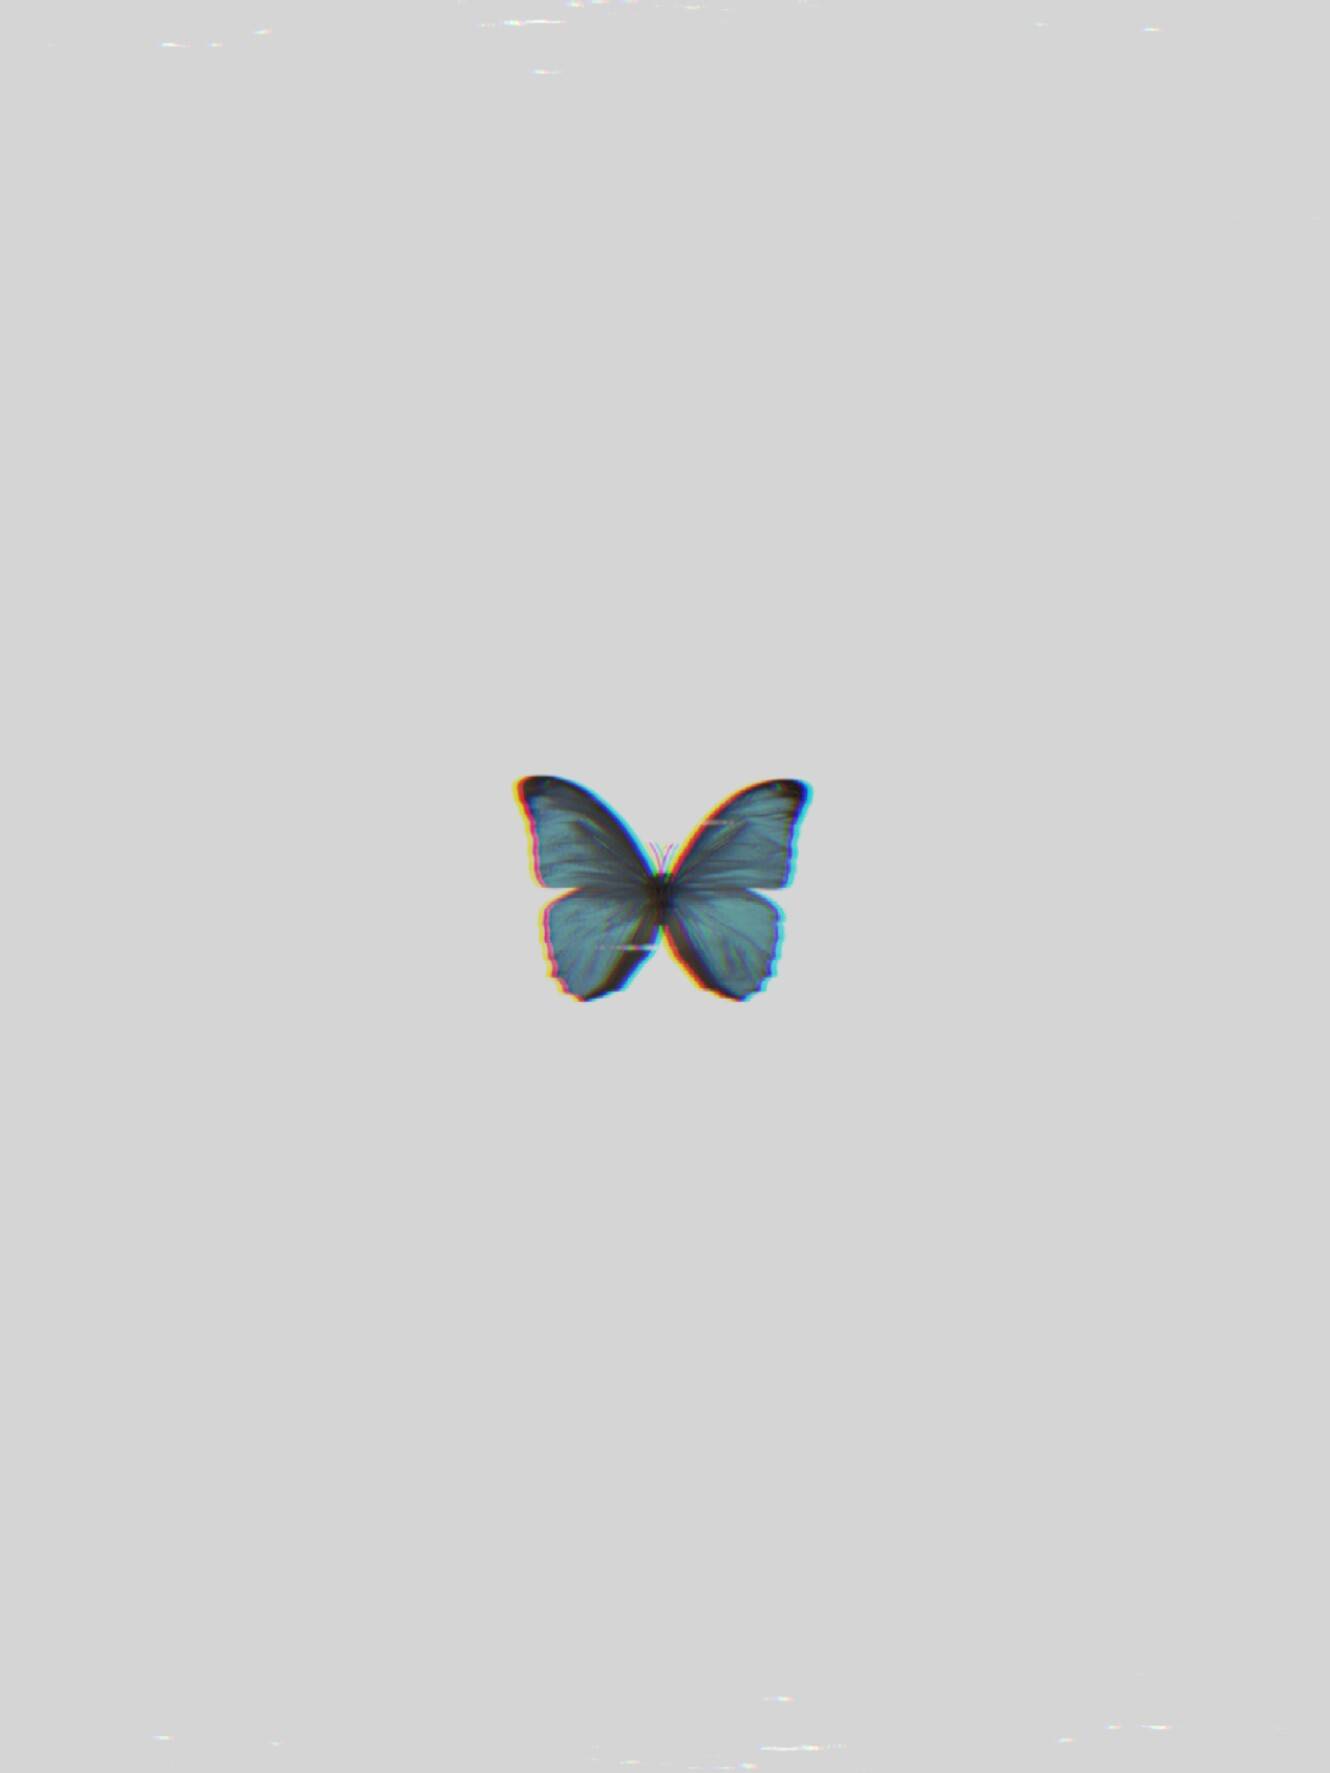 A blue butterfly is on the screen - Butterfly